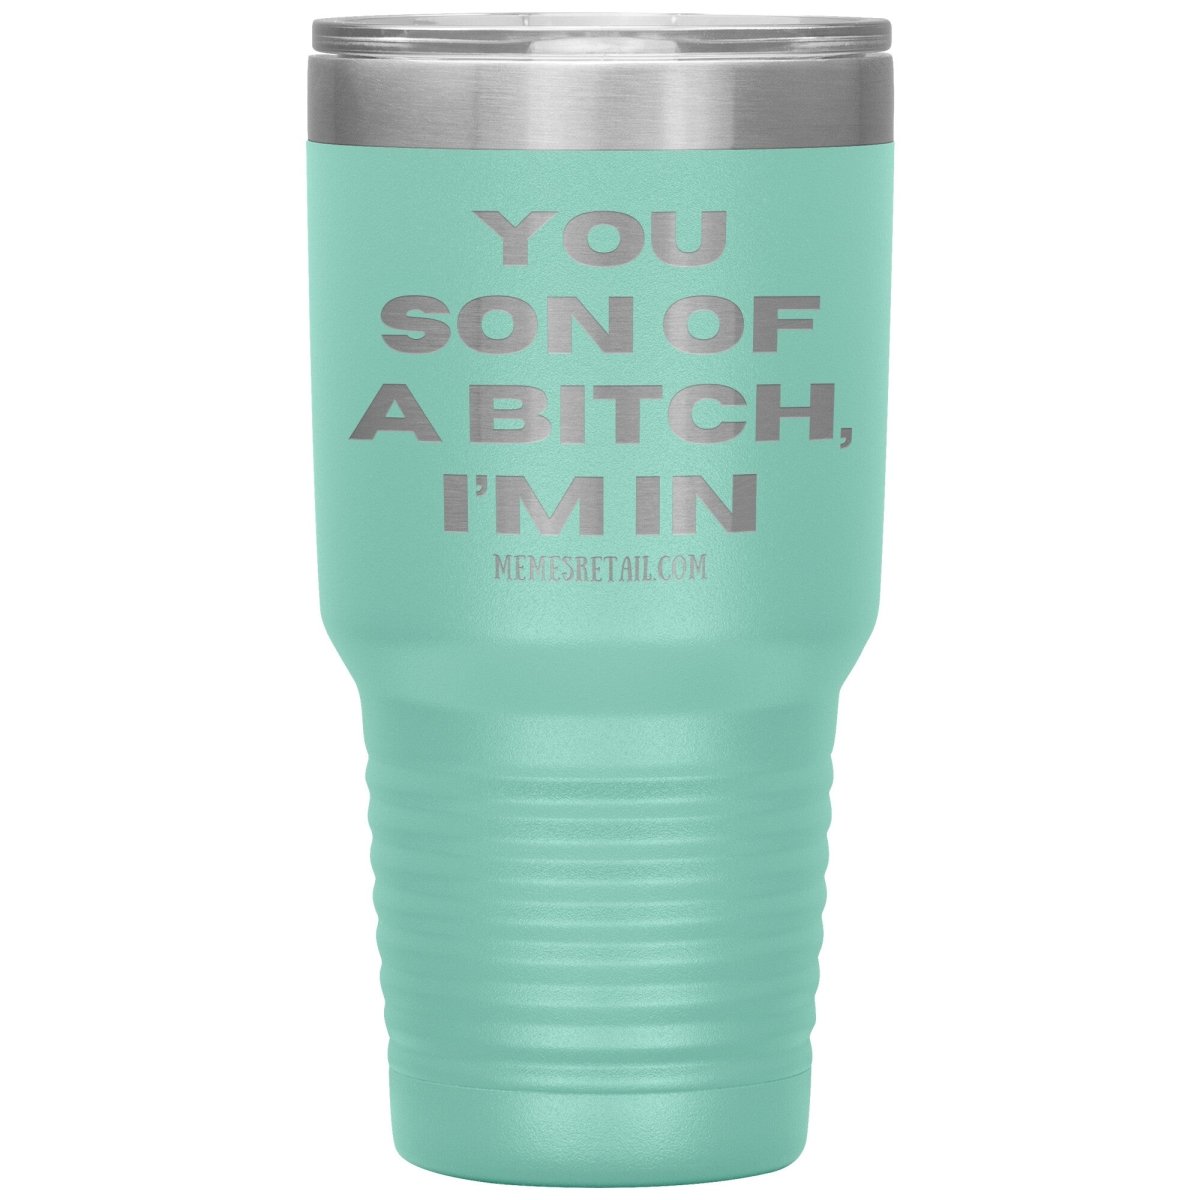 You son of a bitch, I’m in Tumblers, 30oz Insulated Tumbler / Teal - MemesRetail.com